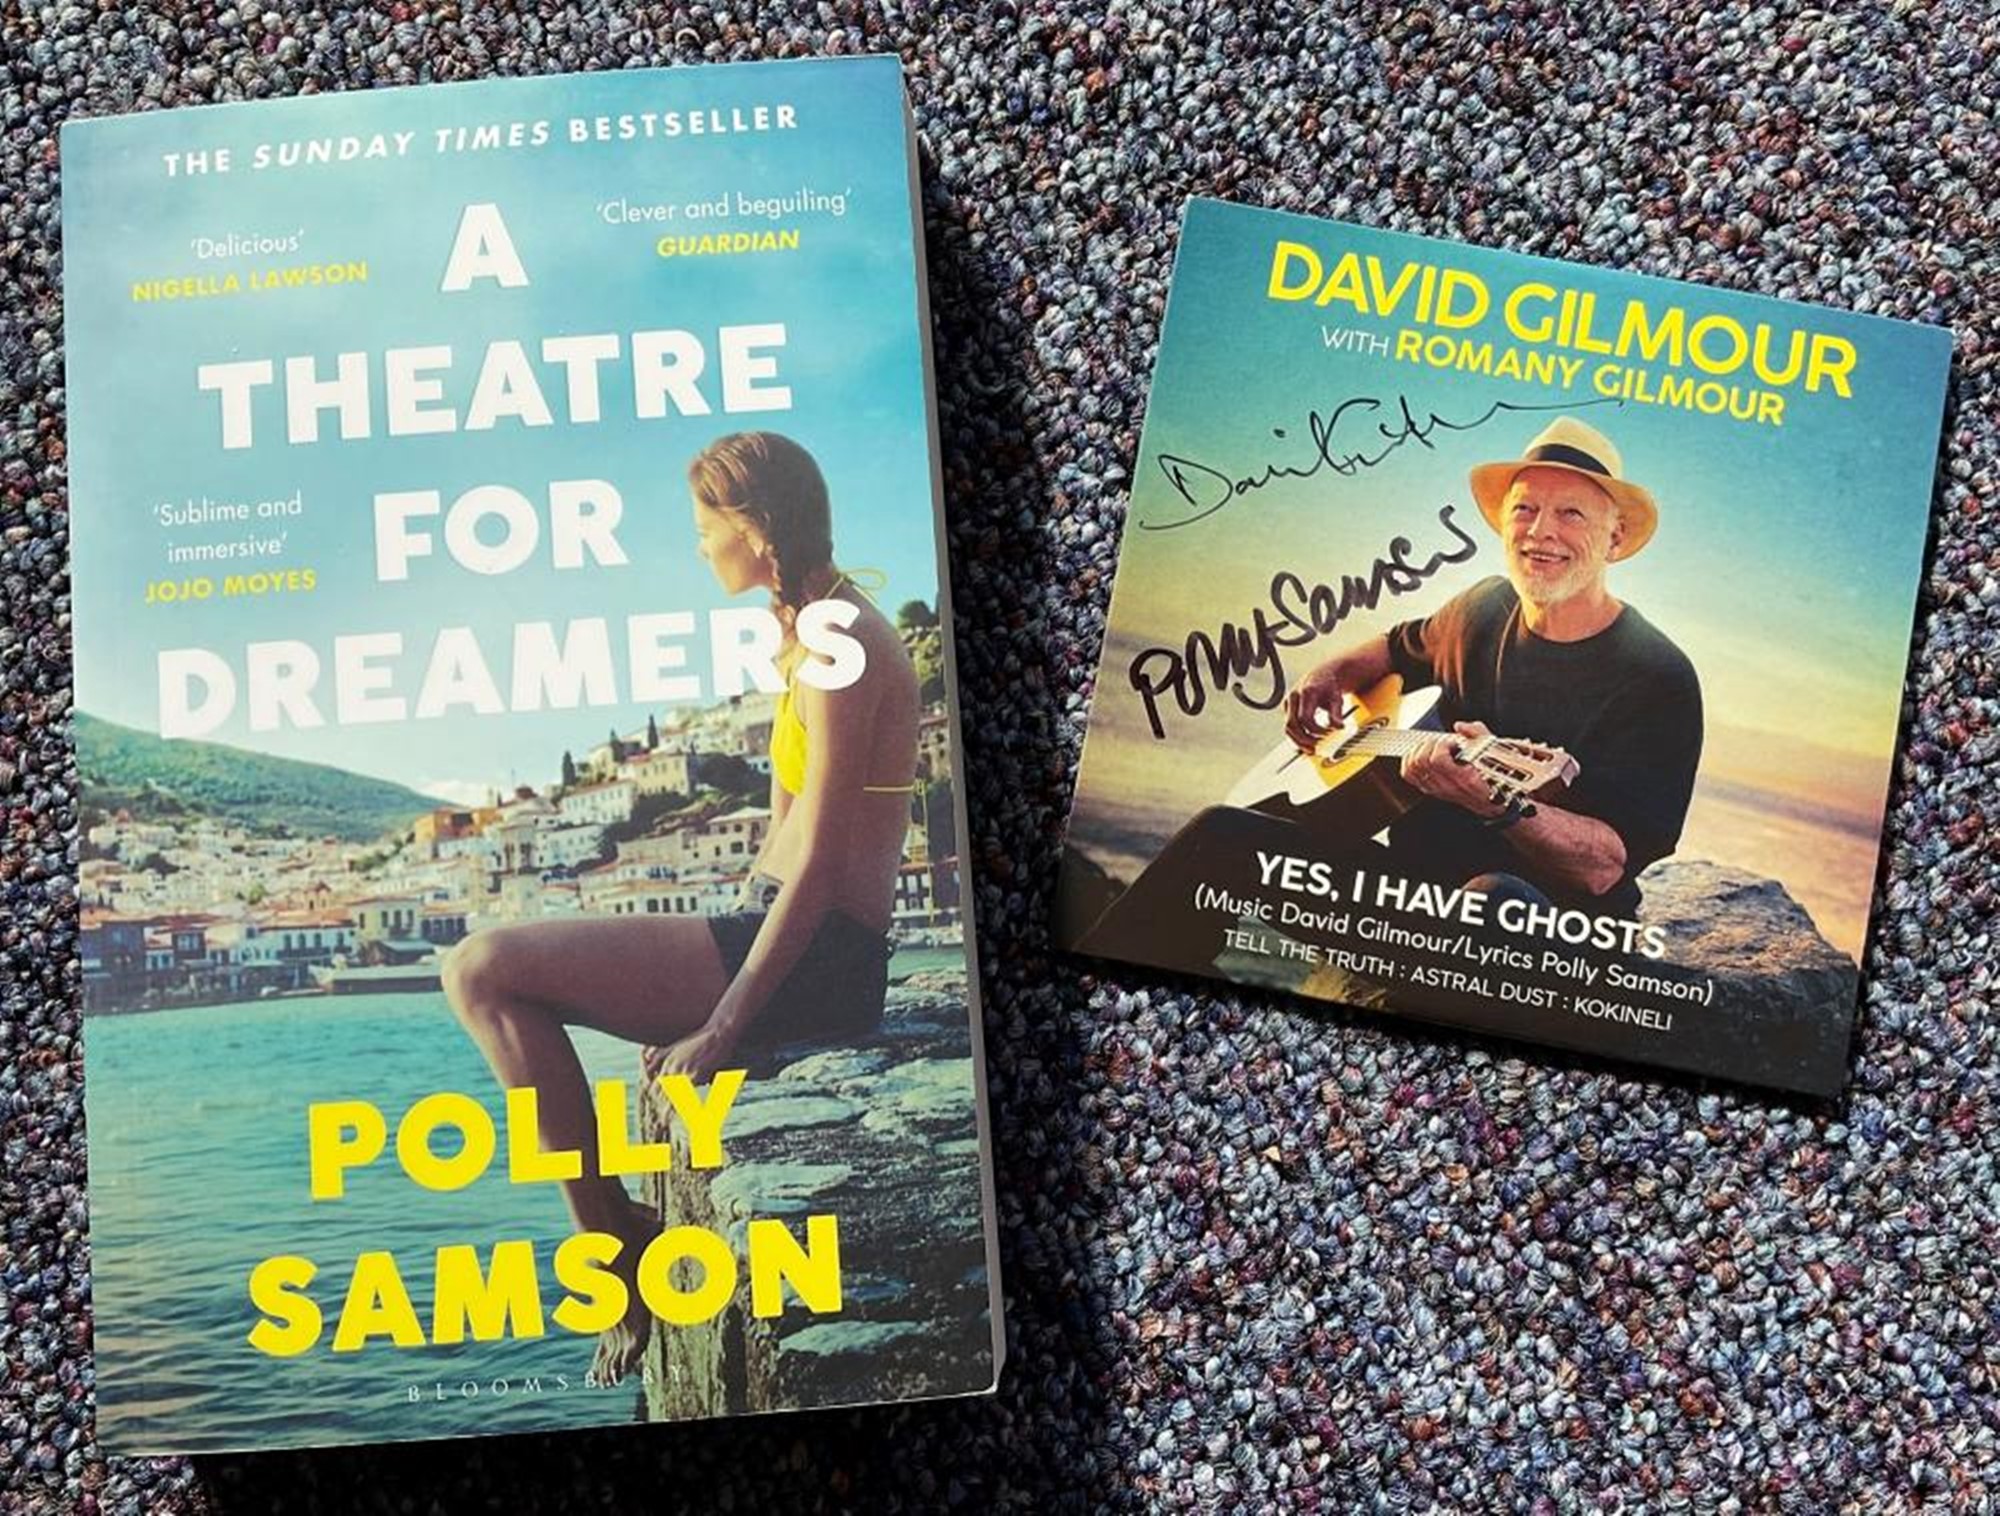 Polly Samson and David Gilmour collection featuring a signed CD and paperback book. Gilmour and